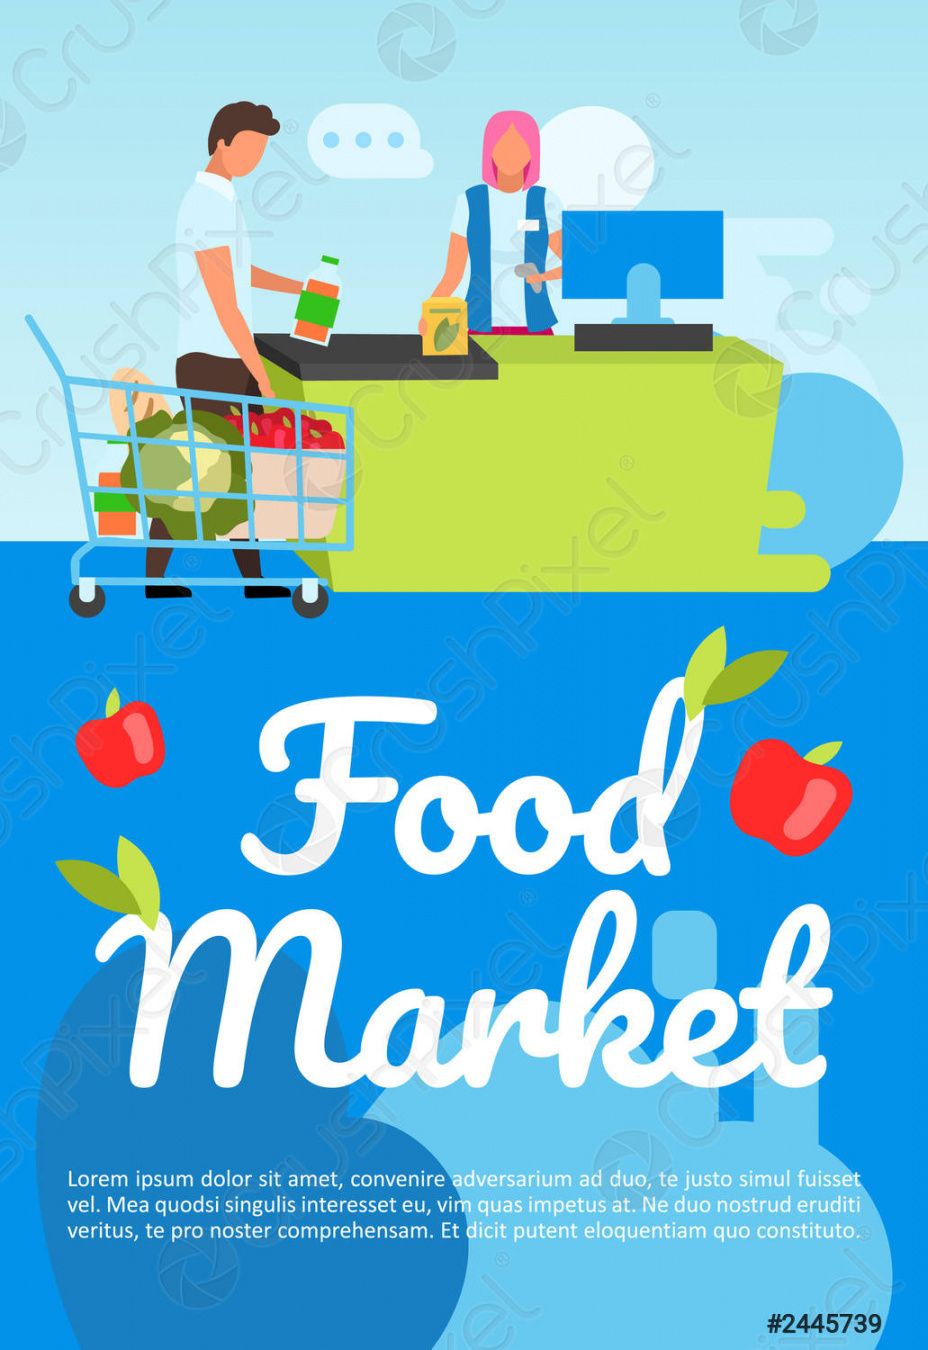 free food market poster vector template grocery store shopping brochure supermarket banner design template pdf